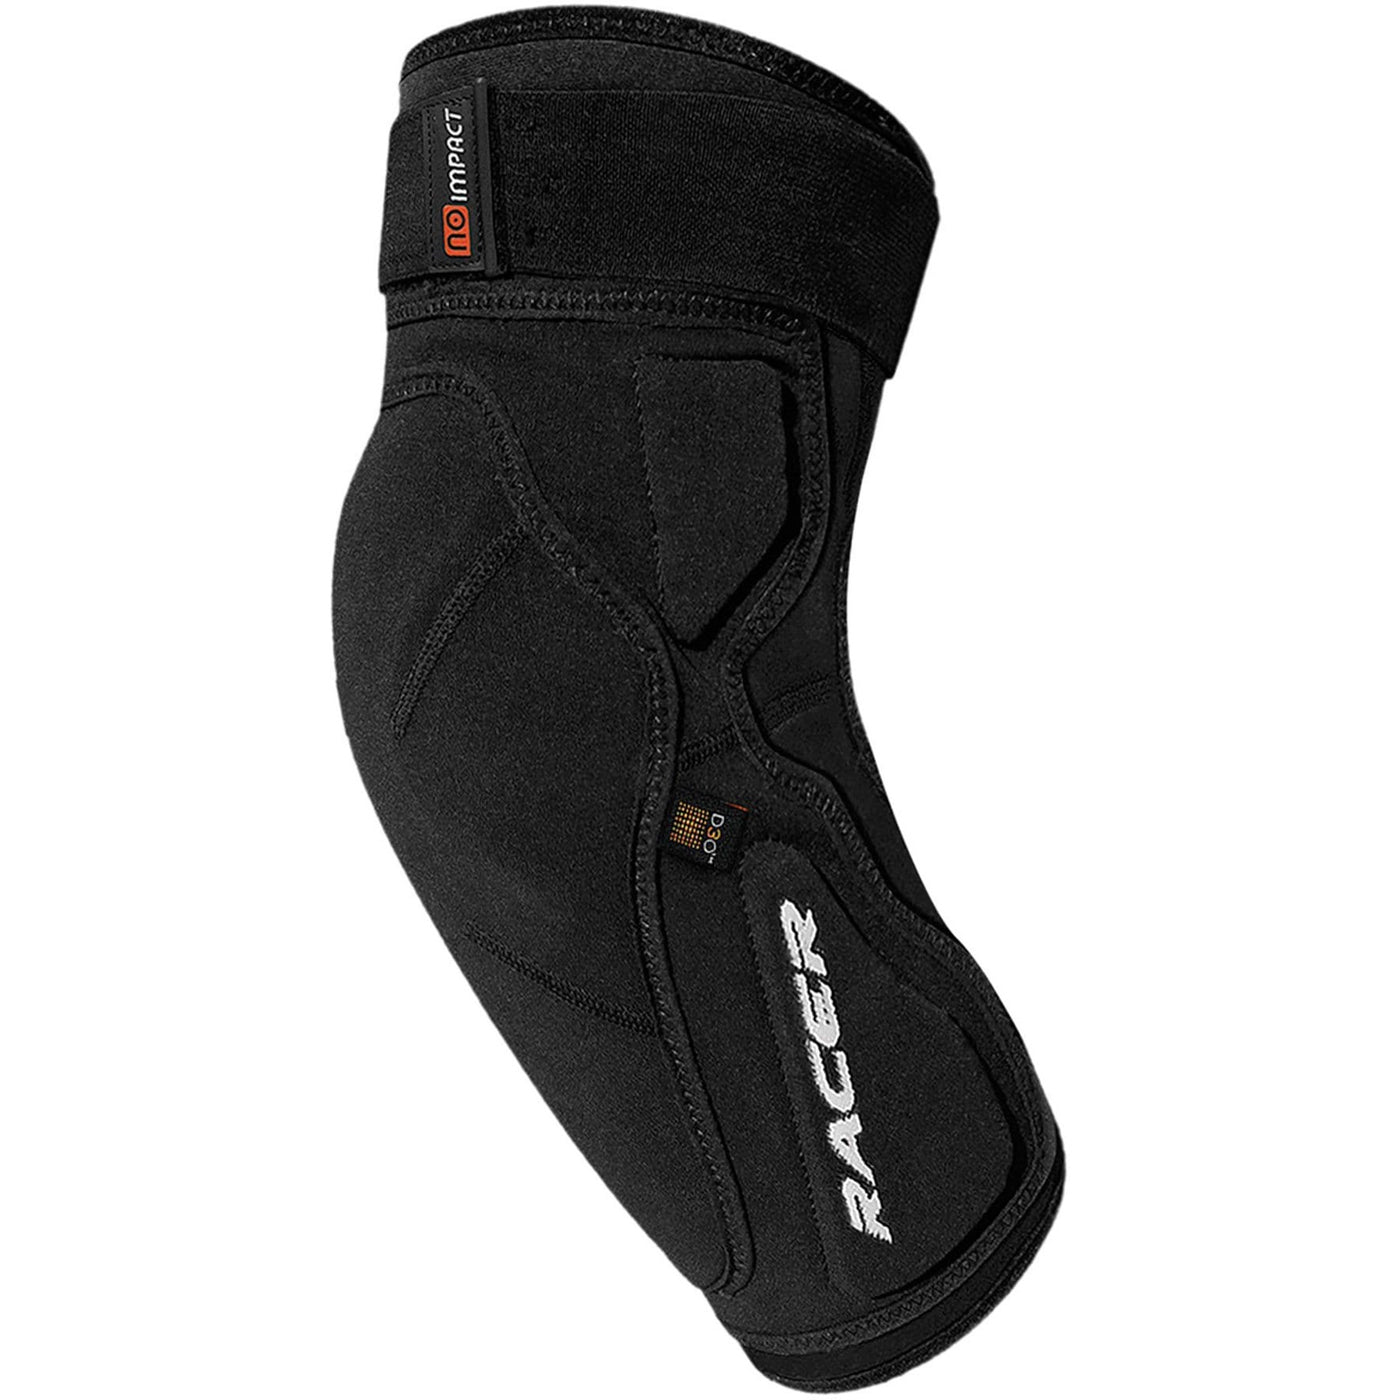 RACER France Elbow Guards - Profile